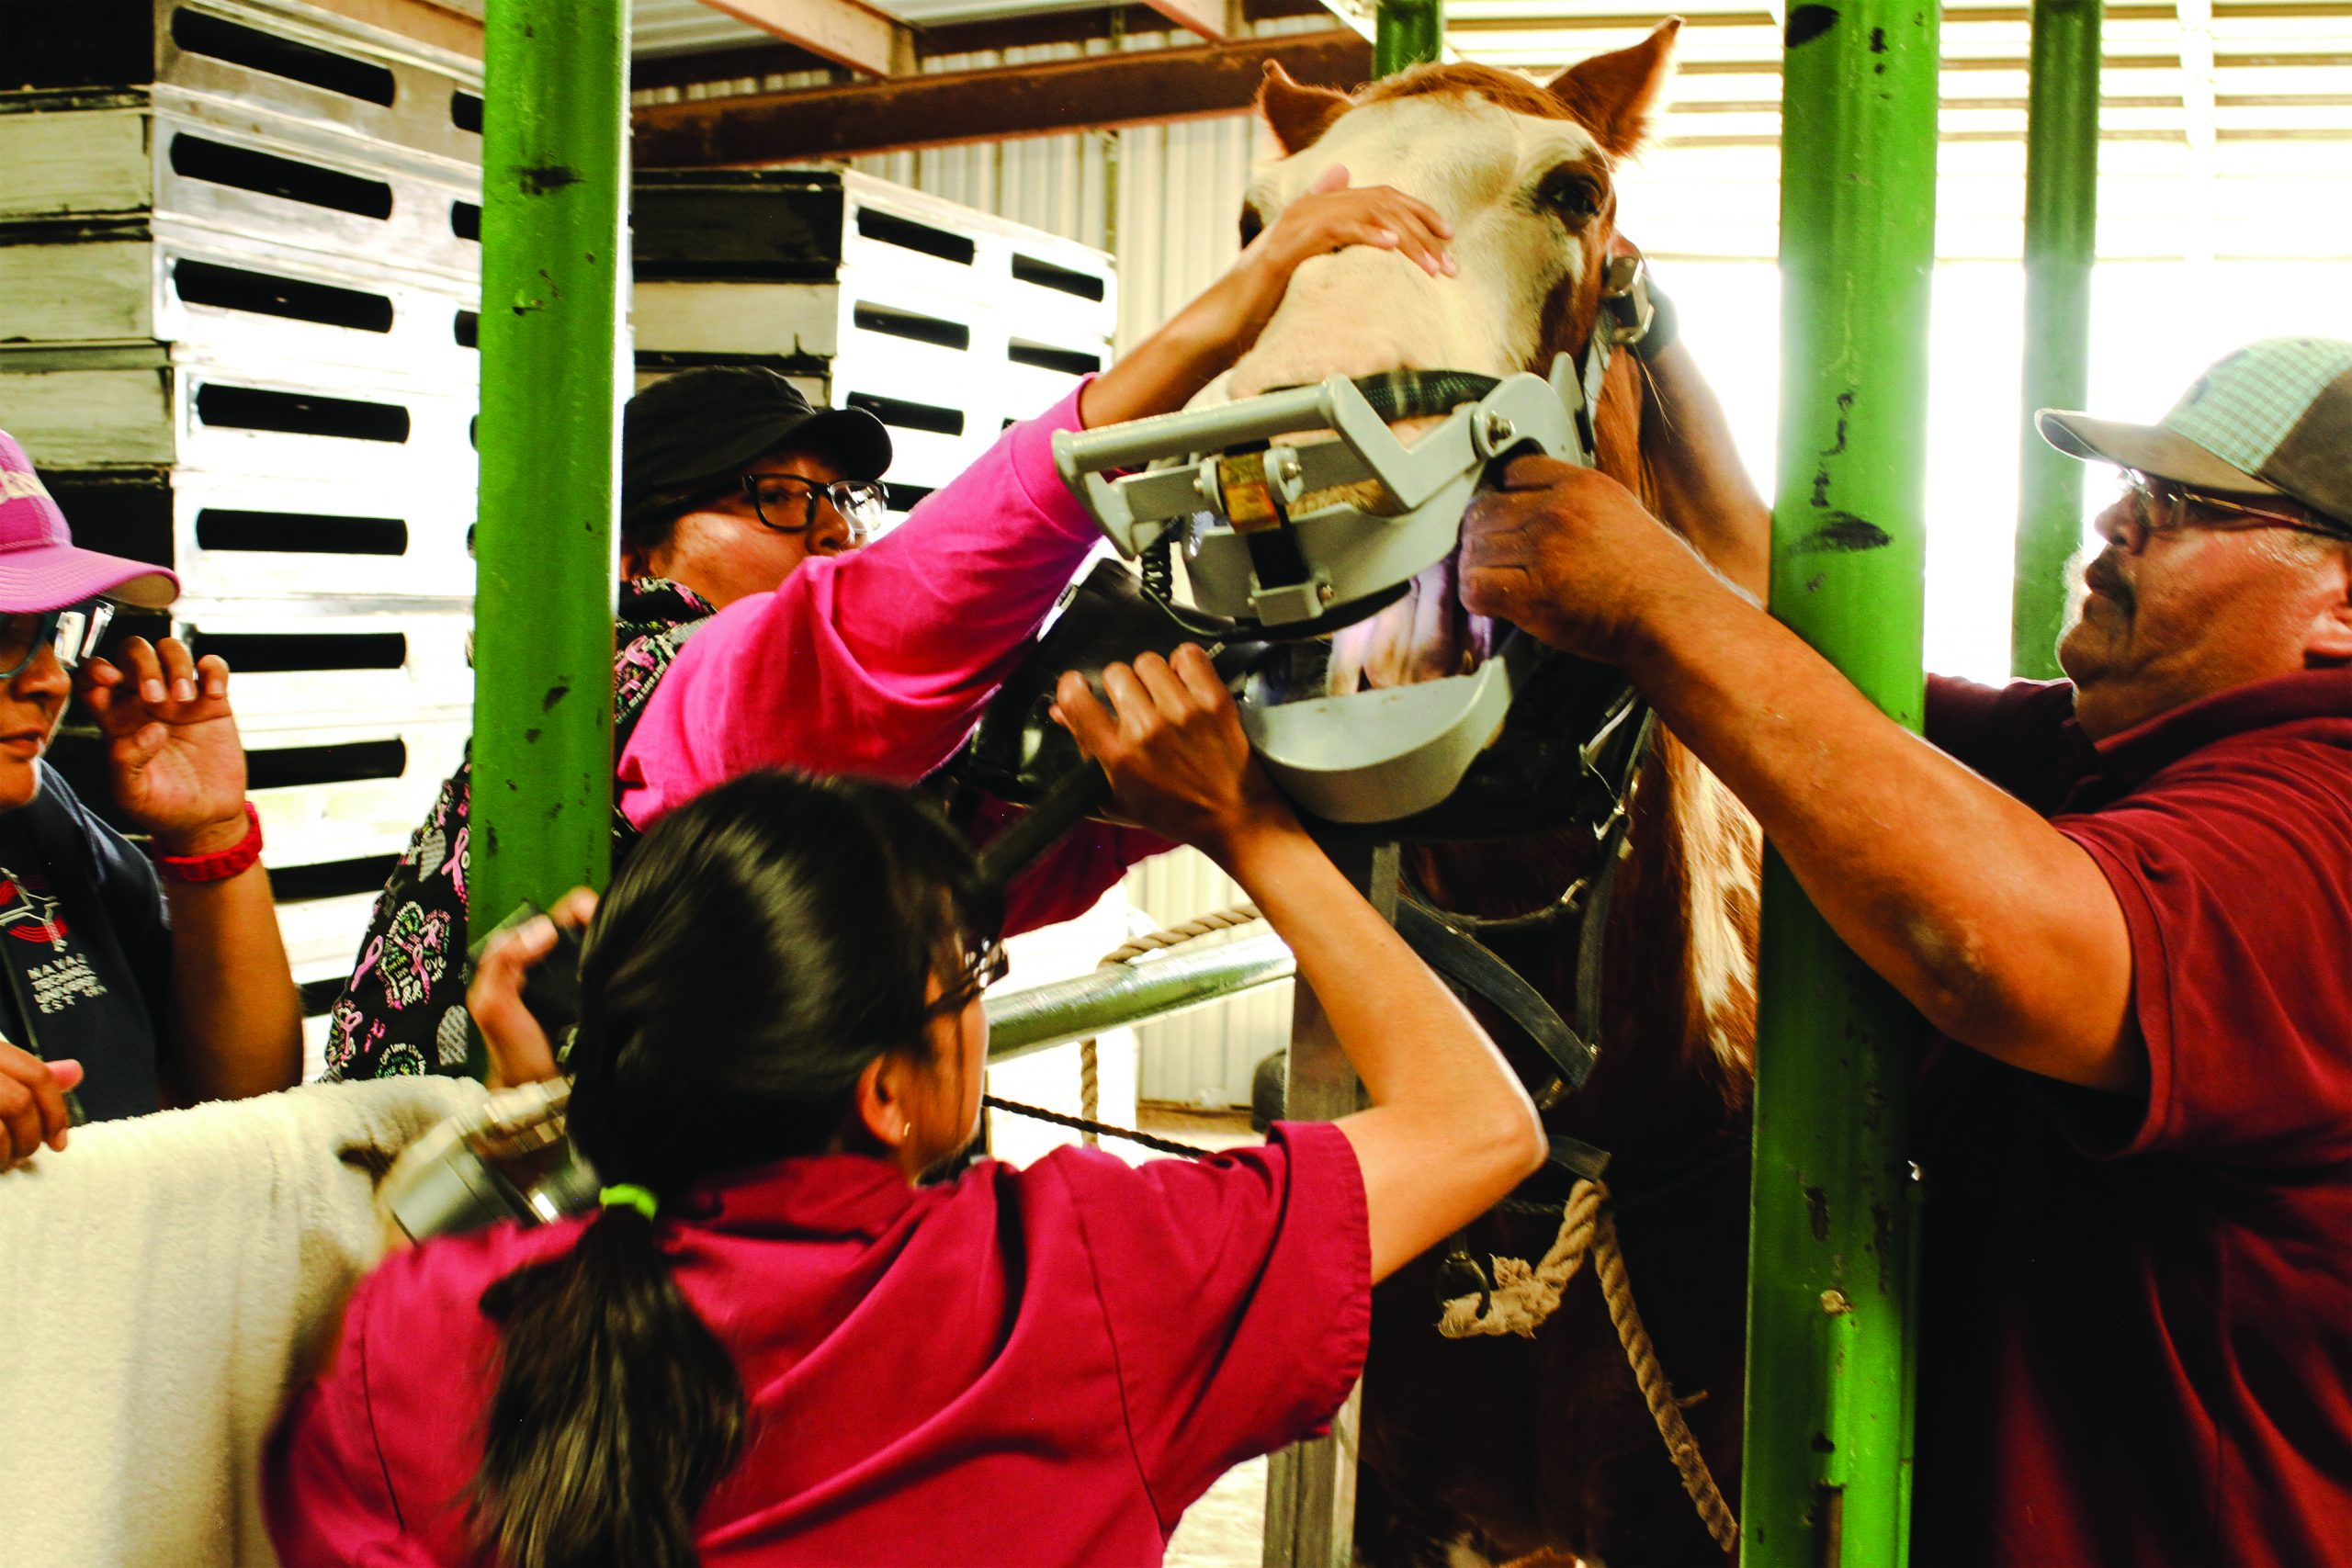 Dr. Germaine Daye works with students Jenneth Begay and Celestina Salt and technician Royce Craig in examining a horse’s teeth at the NTU Vet Teaching Hospital’s barn.